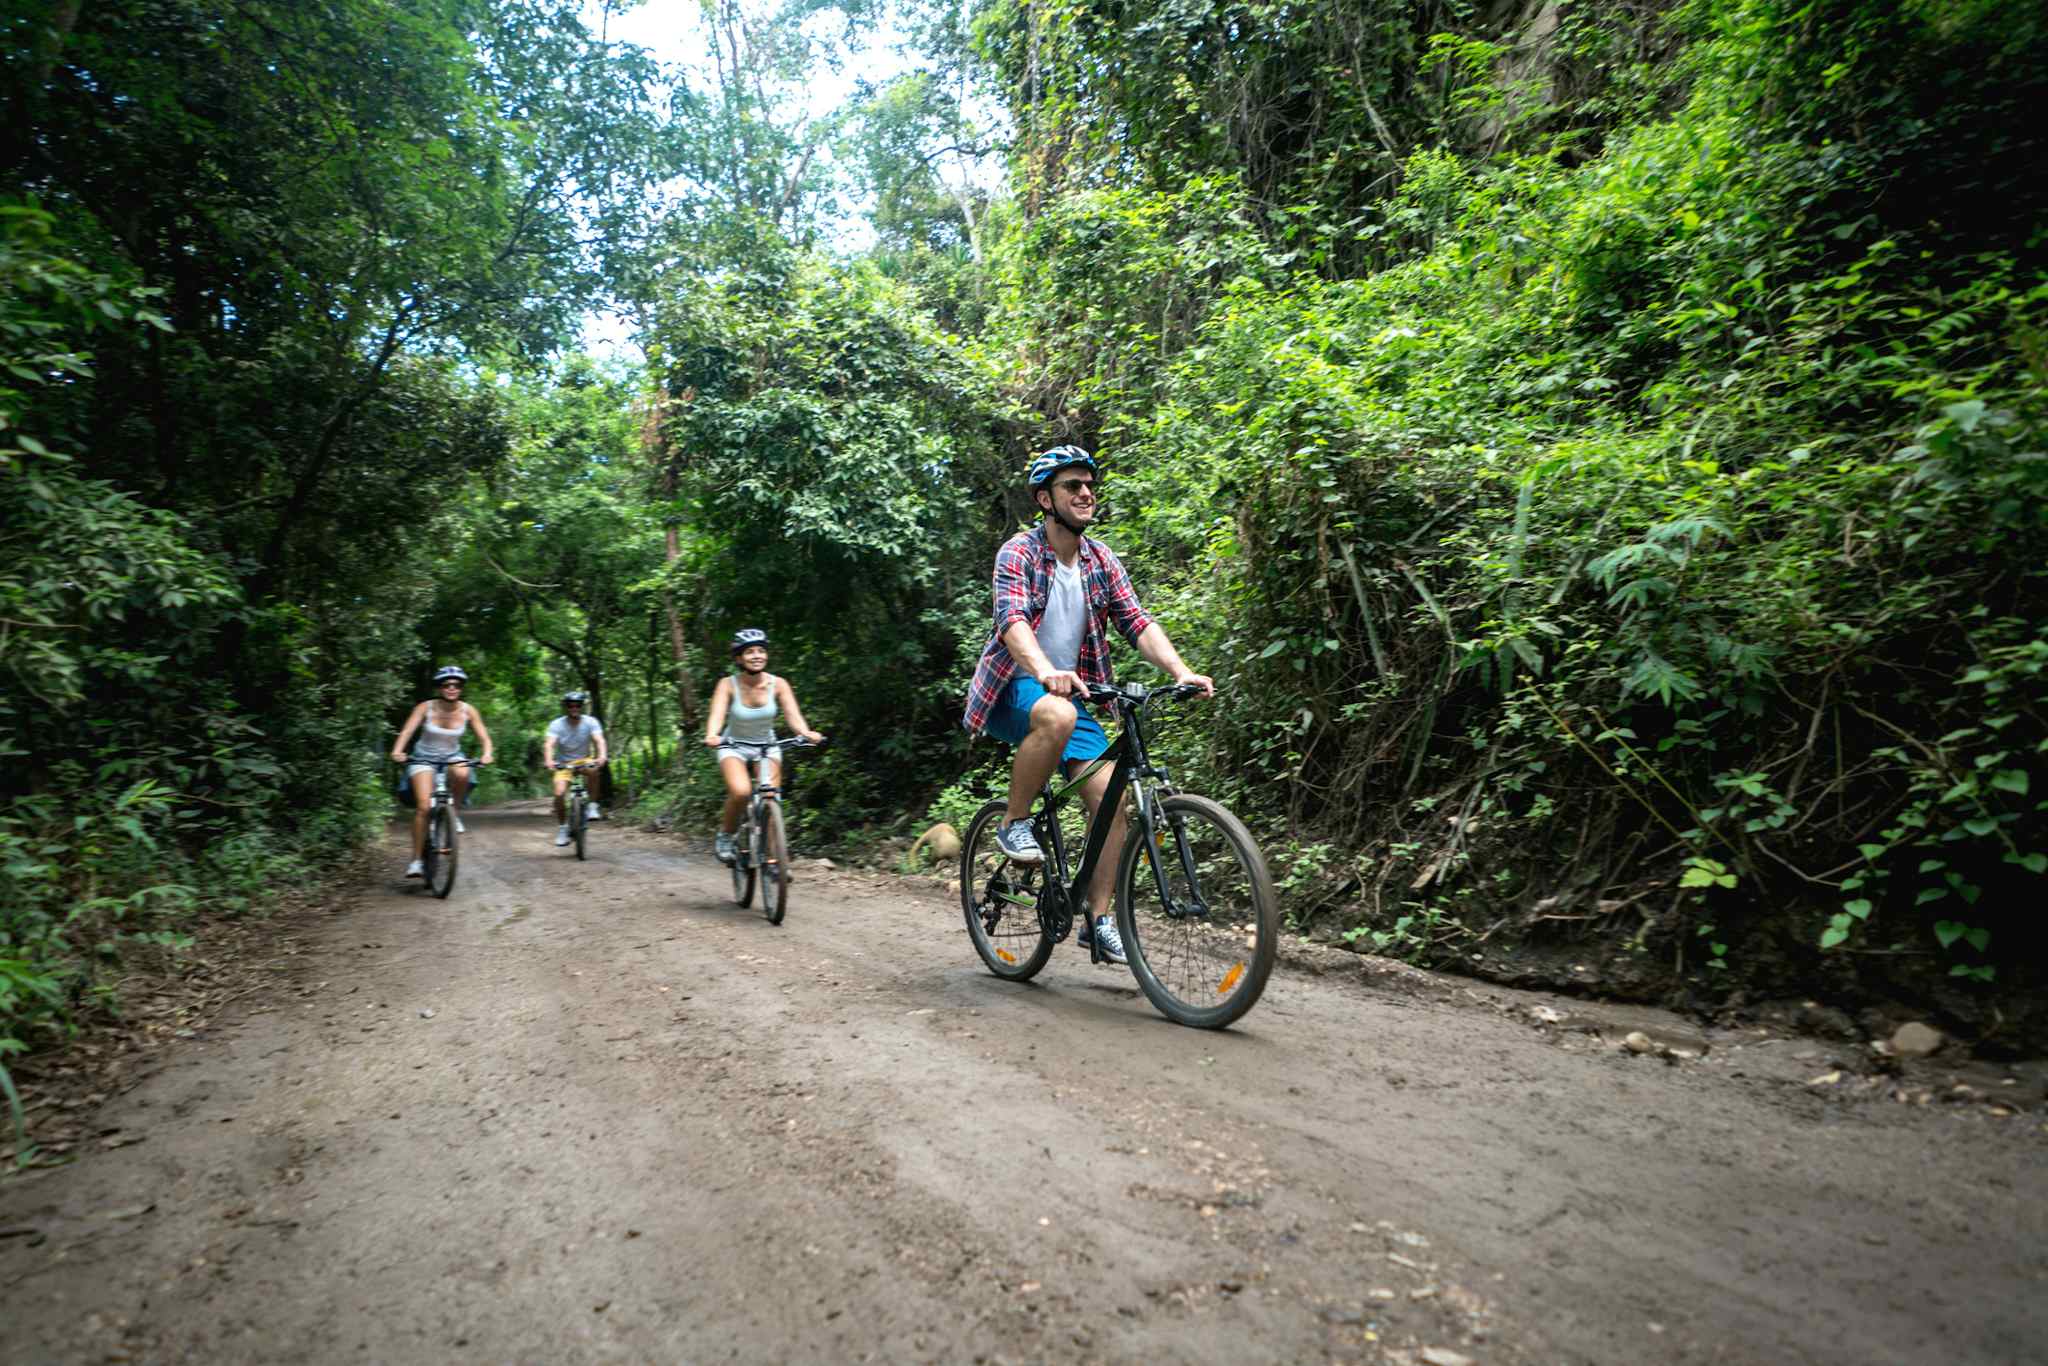 Cyclists, Dirt Road, Colombia, Getty